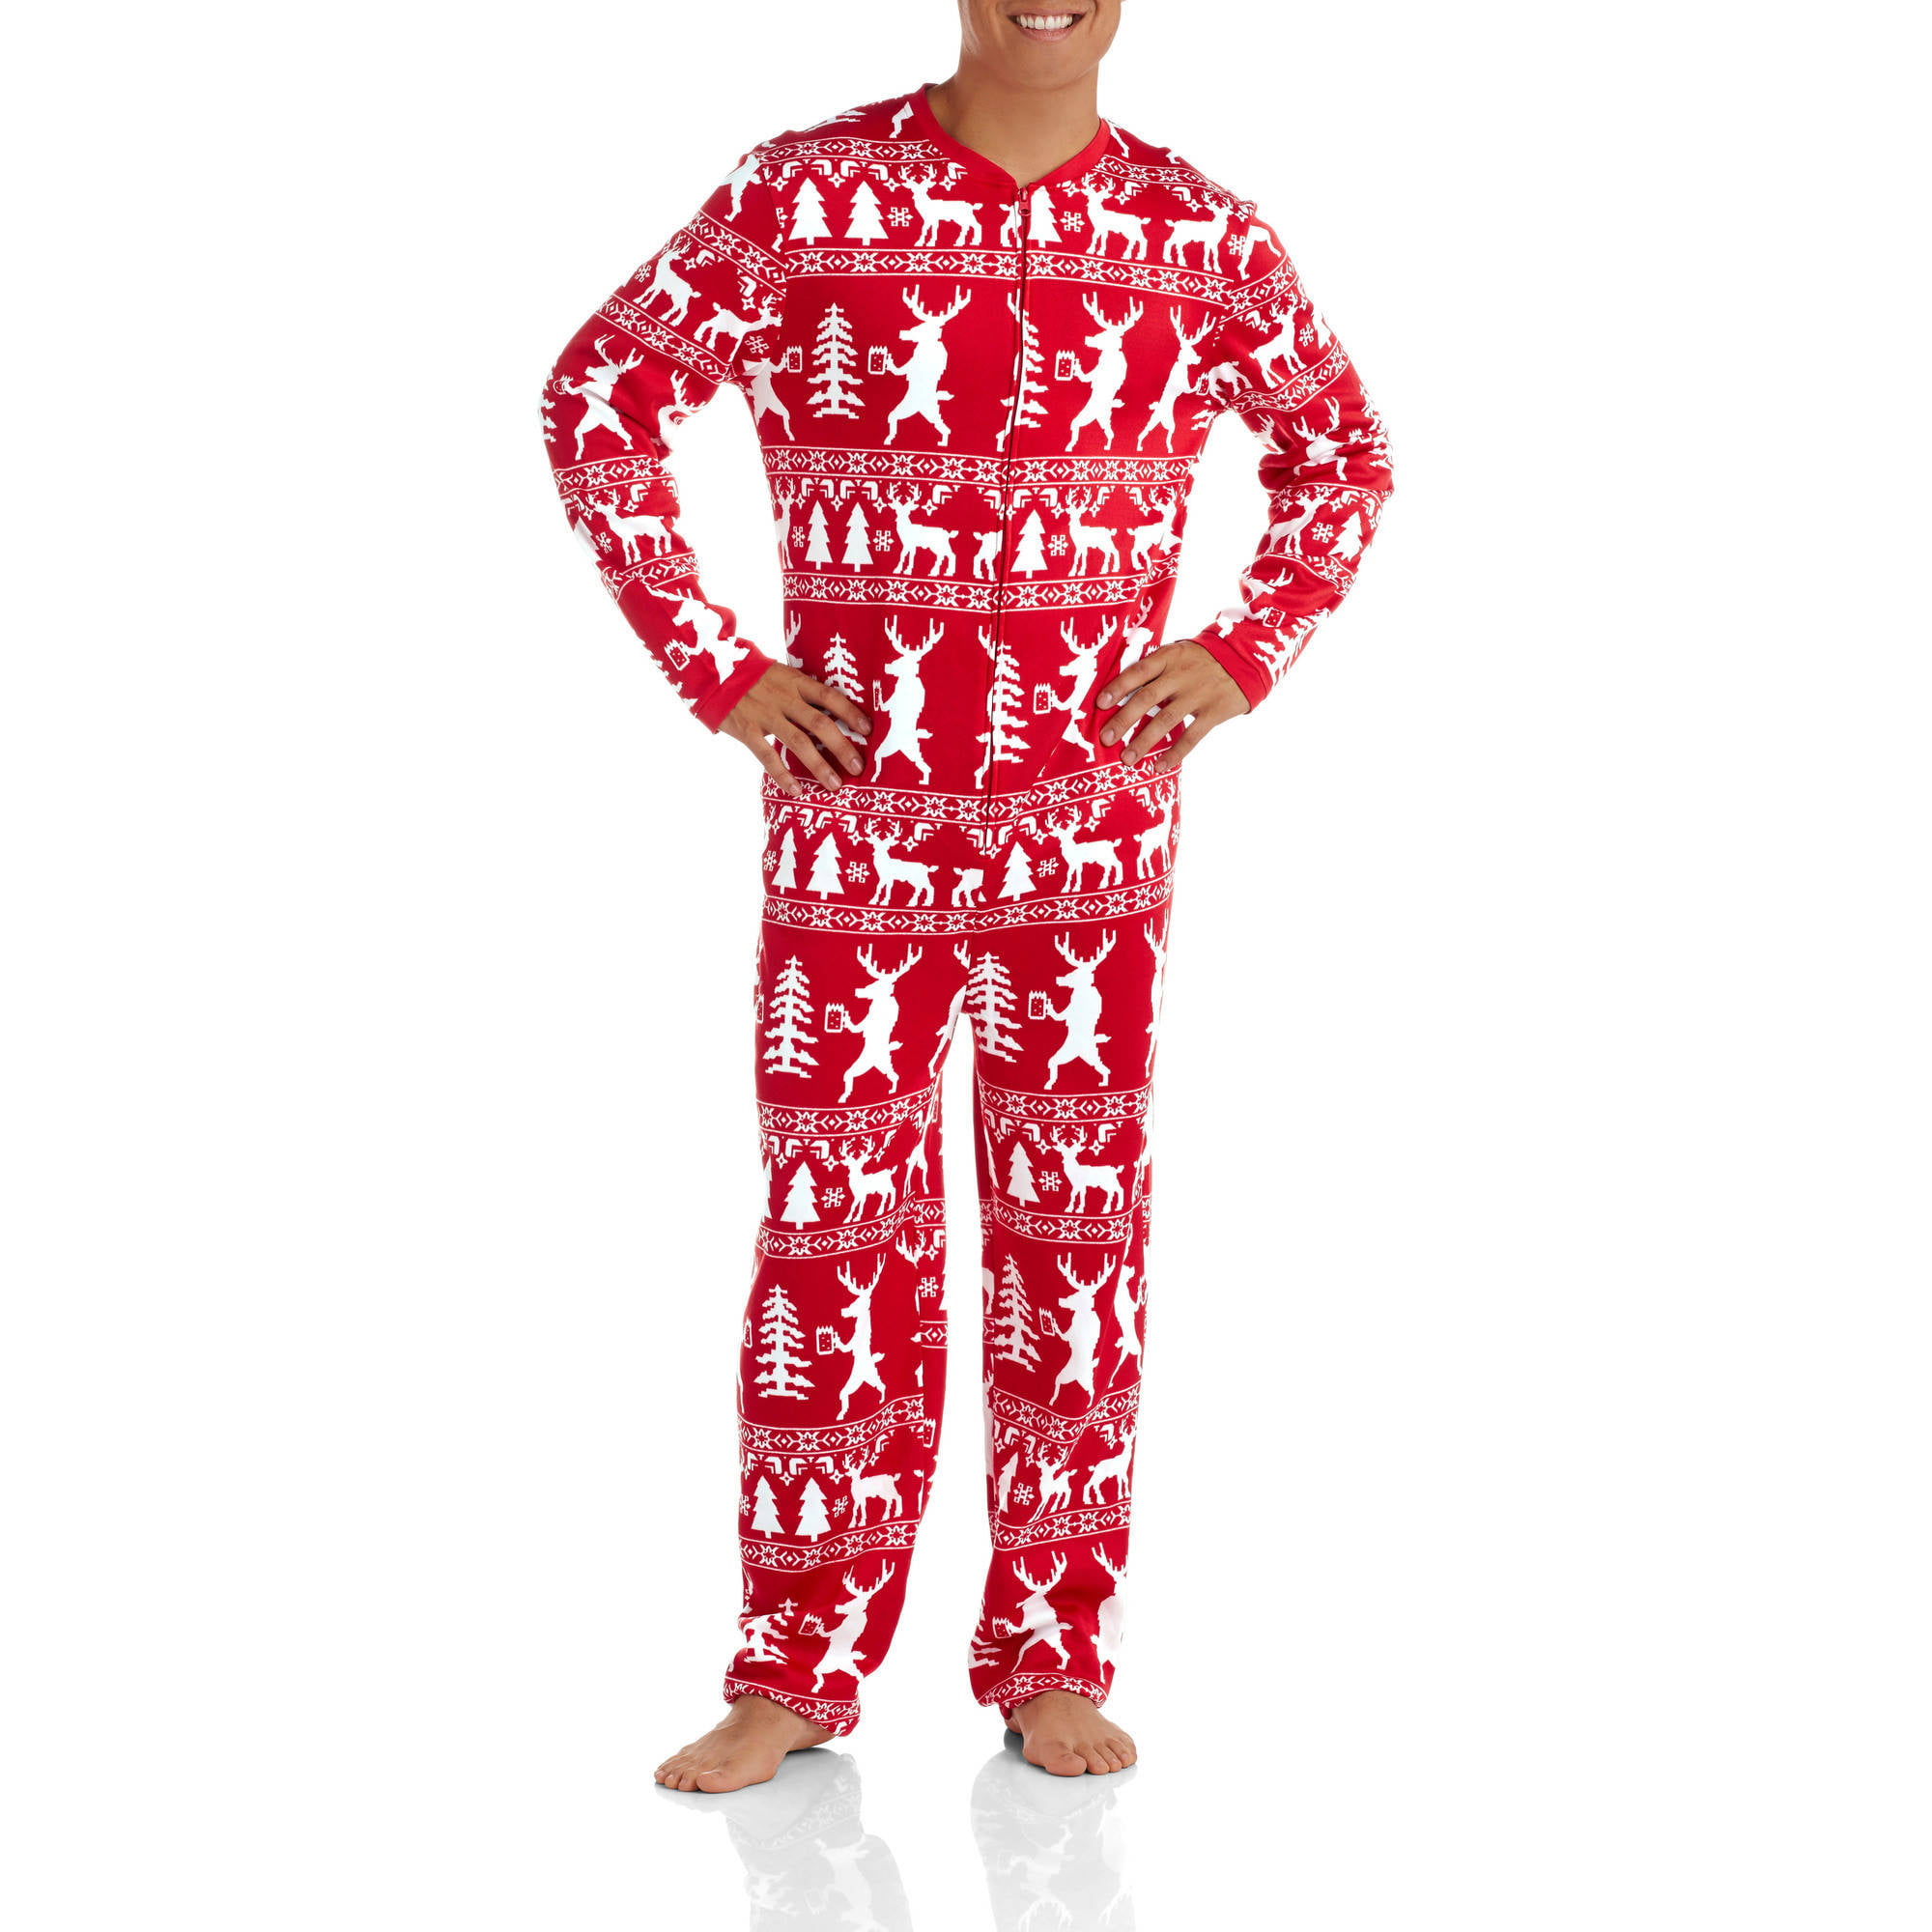 Men's Ugly Sweater Holiday Union Suit - Walmart.com